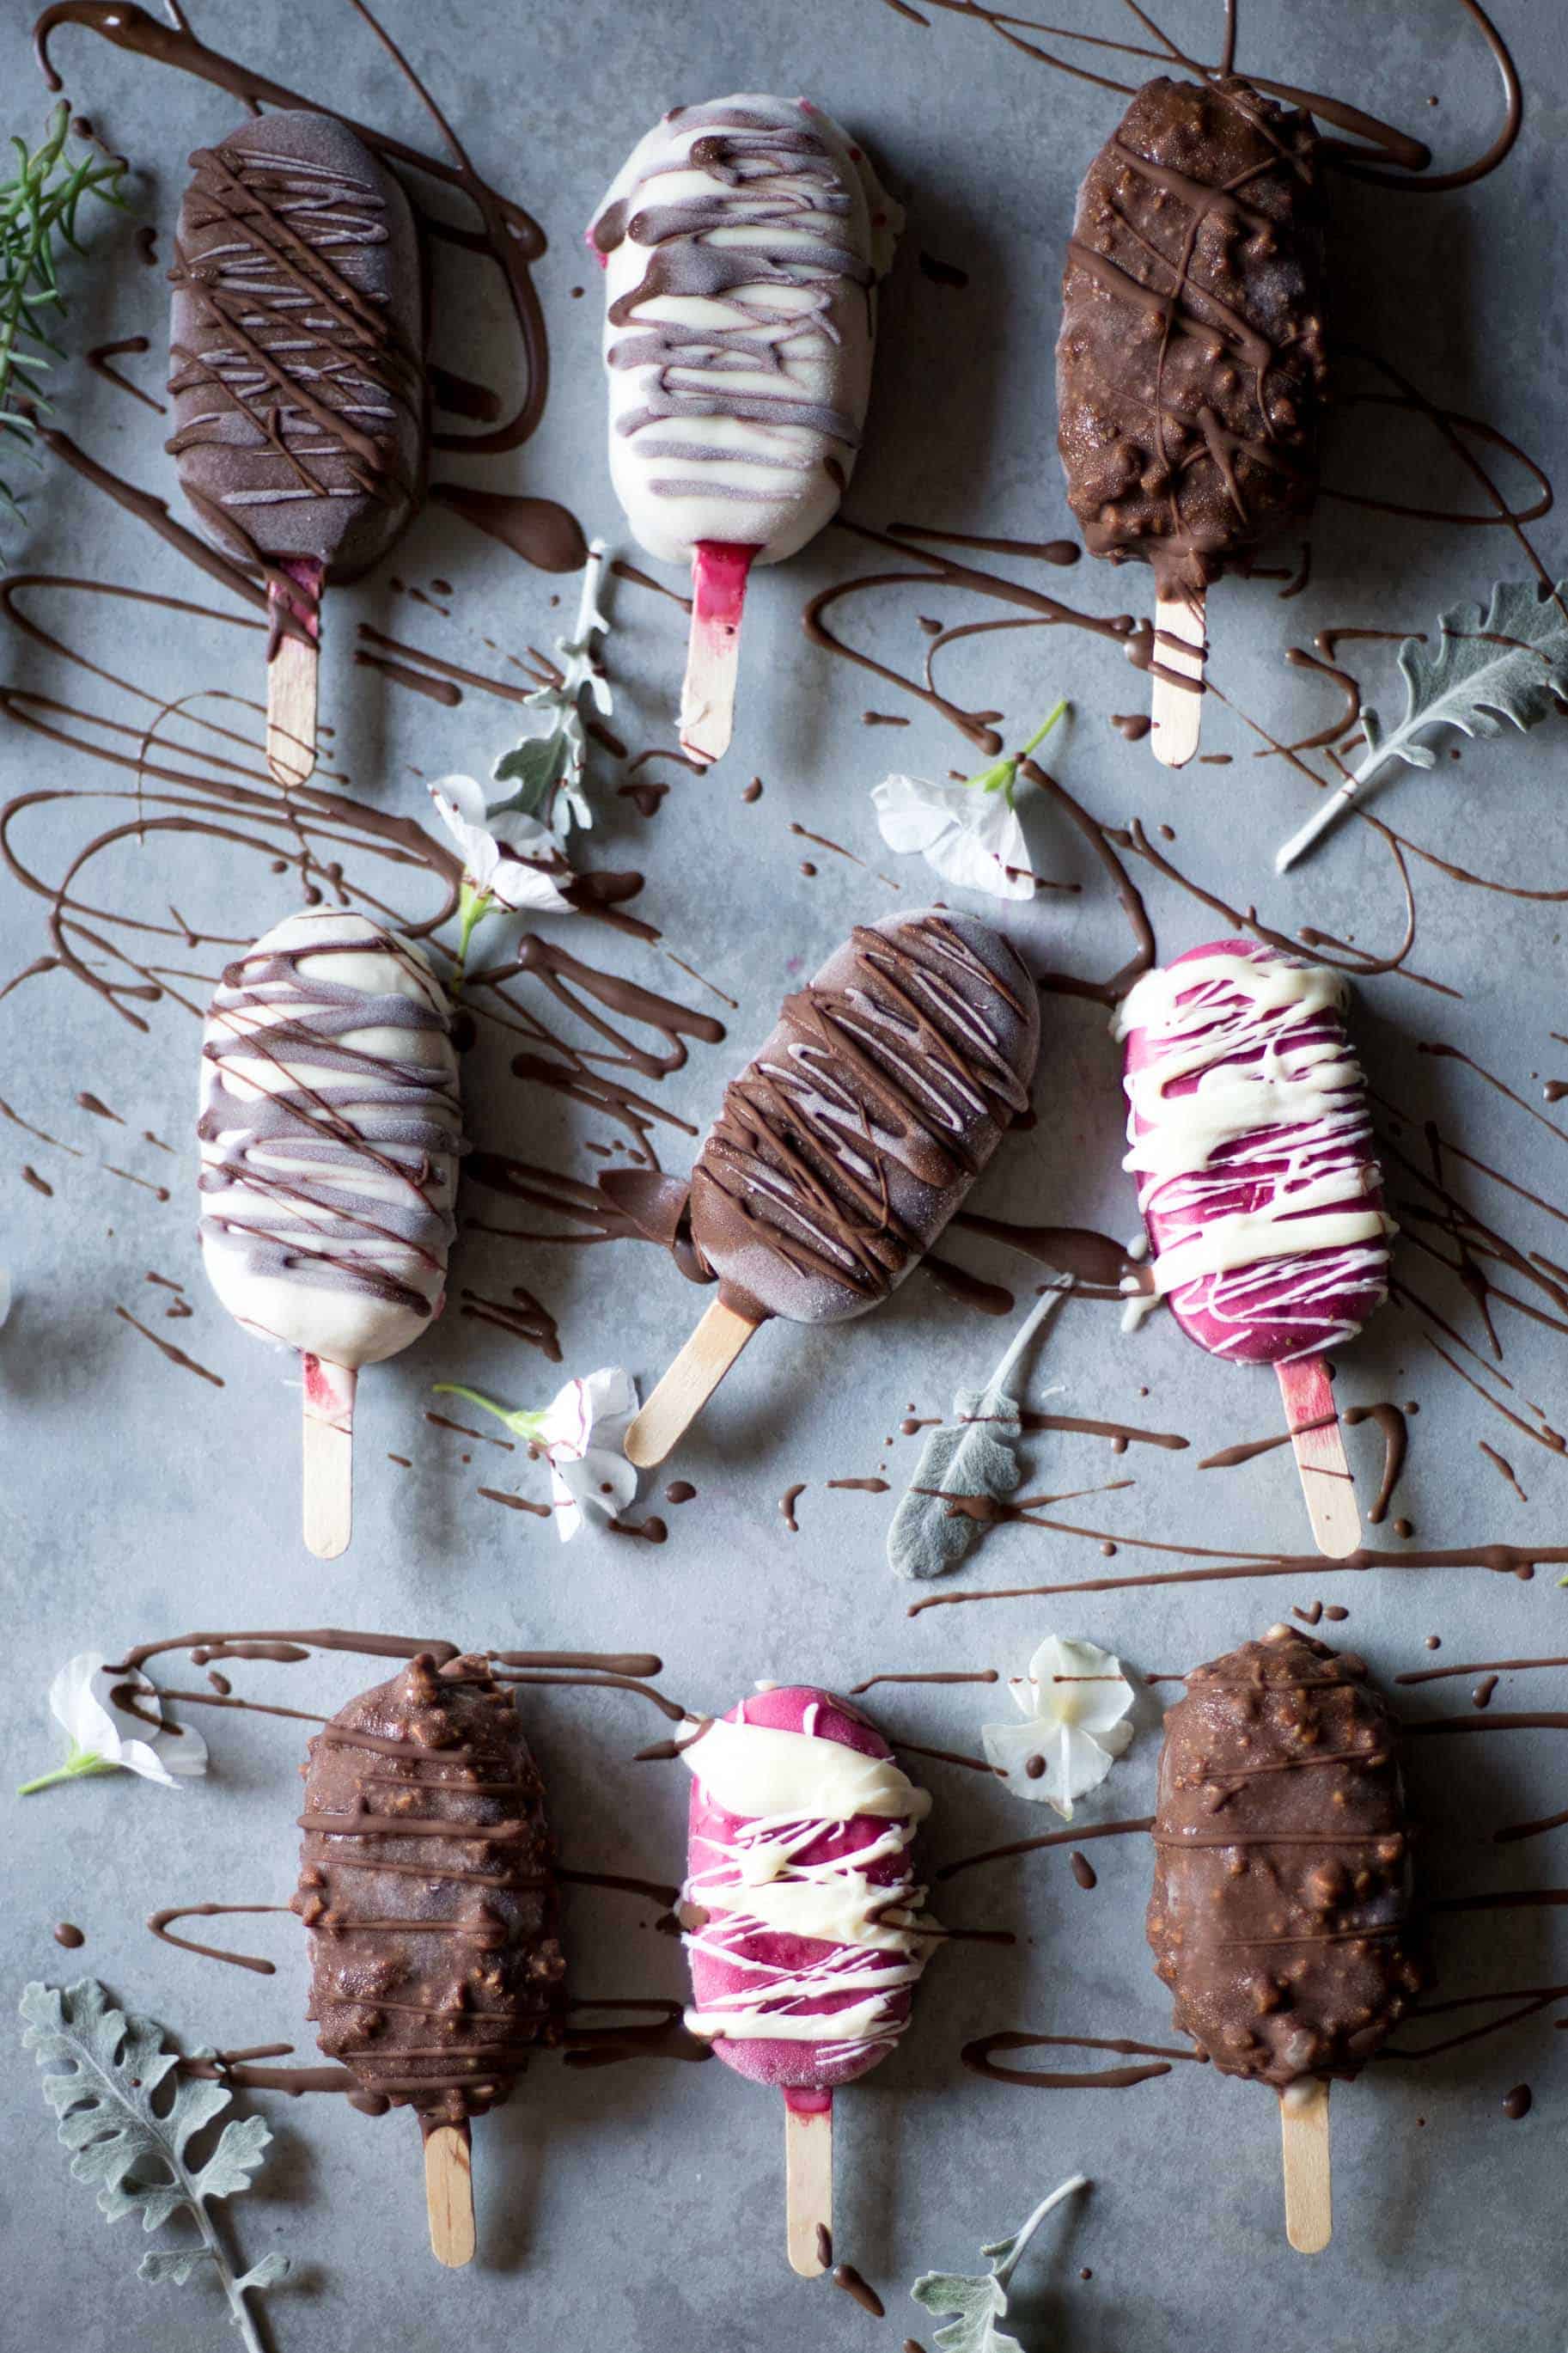 These 5 ingredients simple Vegan Magnum Ice Creams are low FODMAP, super healthy and very easy to make. The perfect healthy summer treats for the hot days.